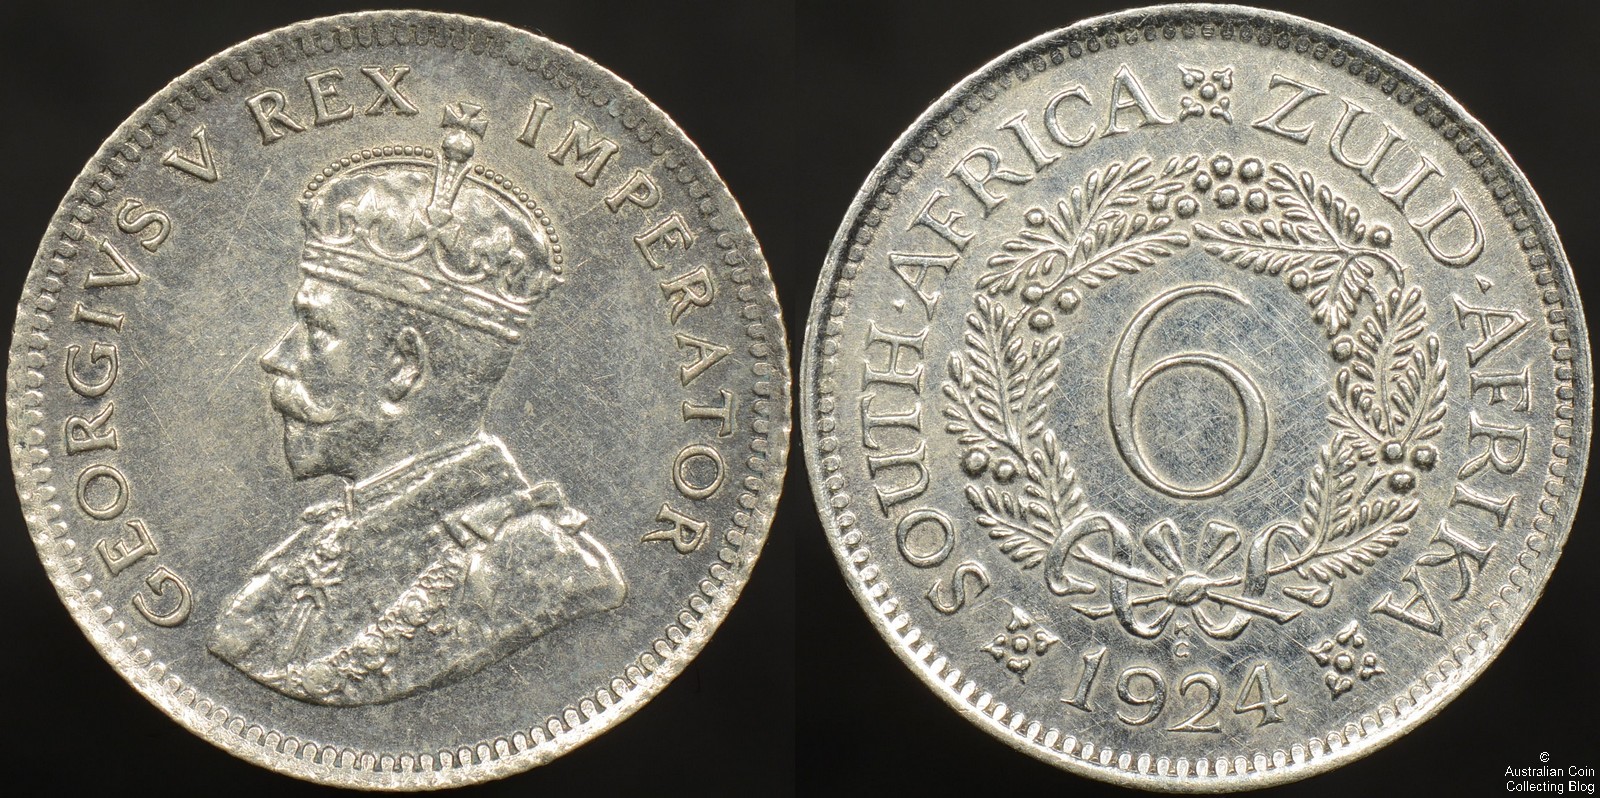 South Africa 1926 Sixpence